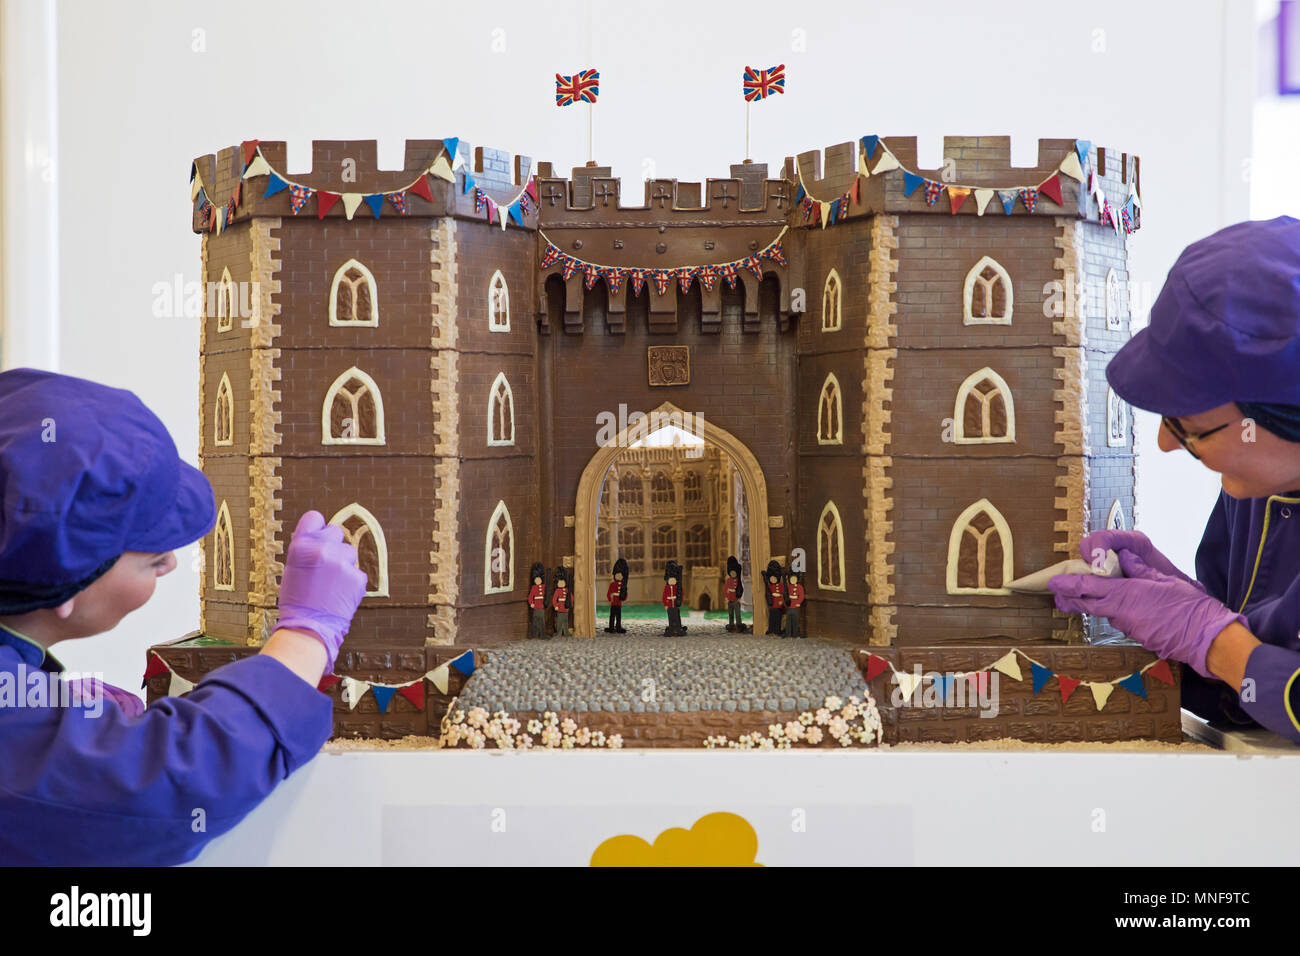 Chocolatiers pipe the finishing touches onto the front of Windsor Castle at Cadbury World in Birmingham, which is made entirely out of chocolate and includes the Henry VIII gate with a hand-piped picture of St George's Chapel visible through it, ahead of the royal wedding this weekend. Stock Photo